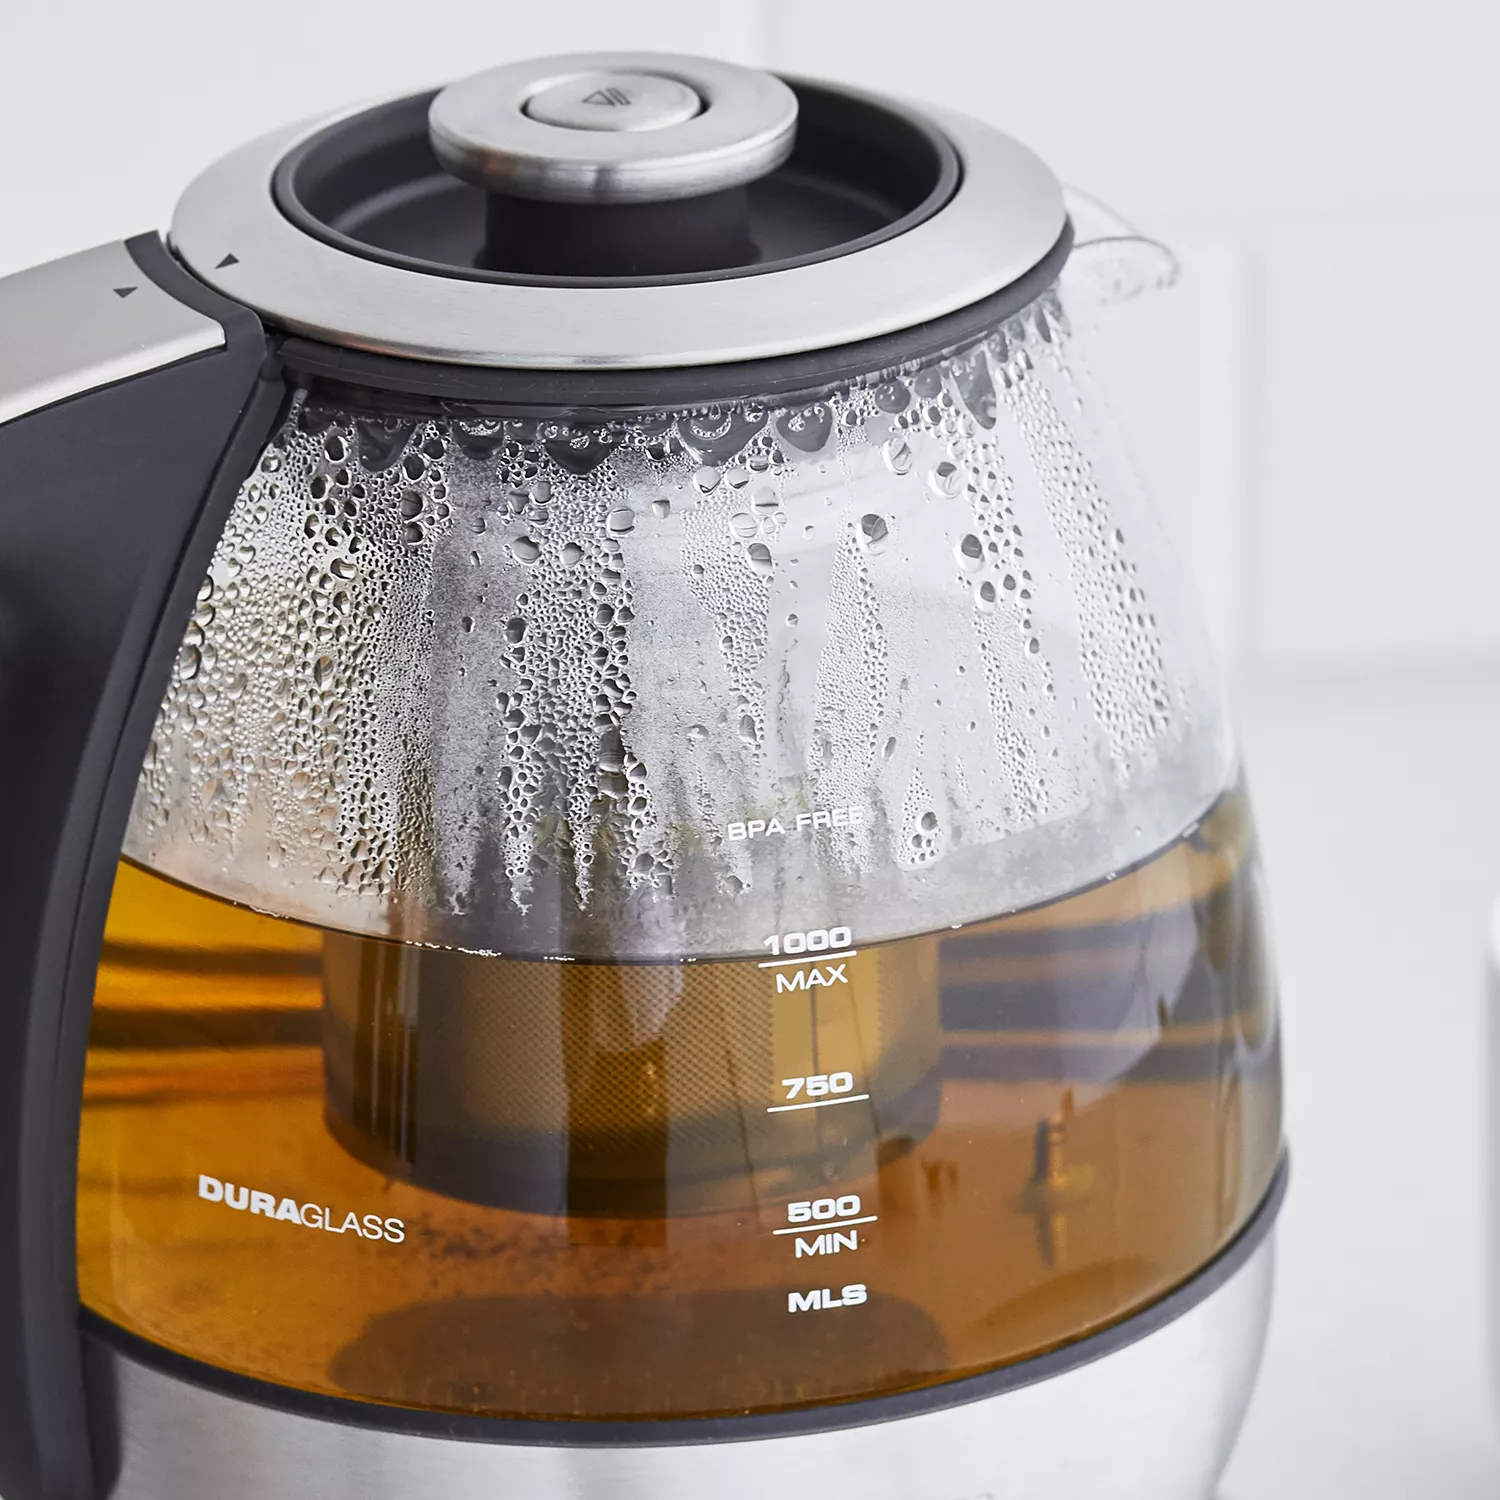 Breville Smart Tea Infuser Review: Brew Better Tasting Tea With